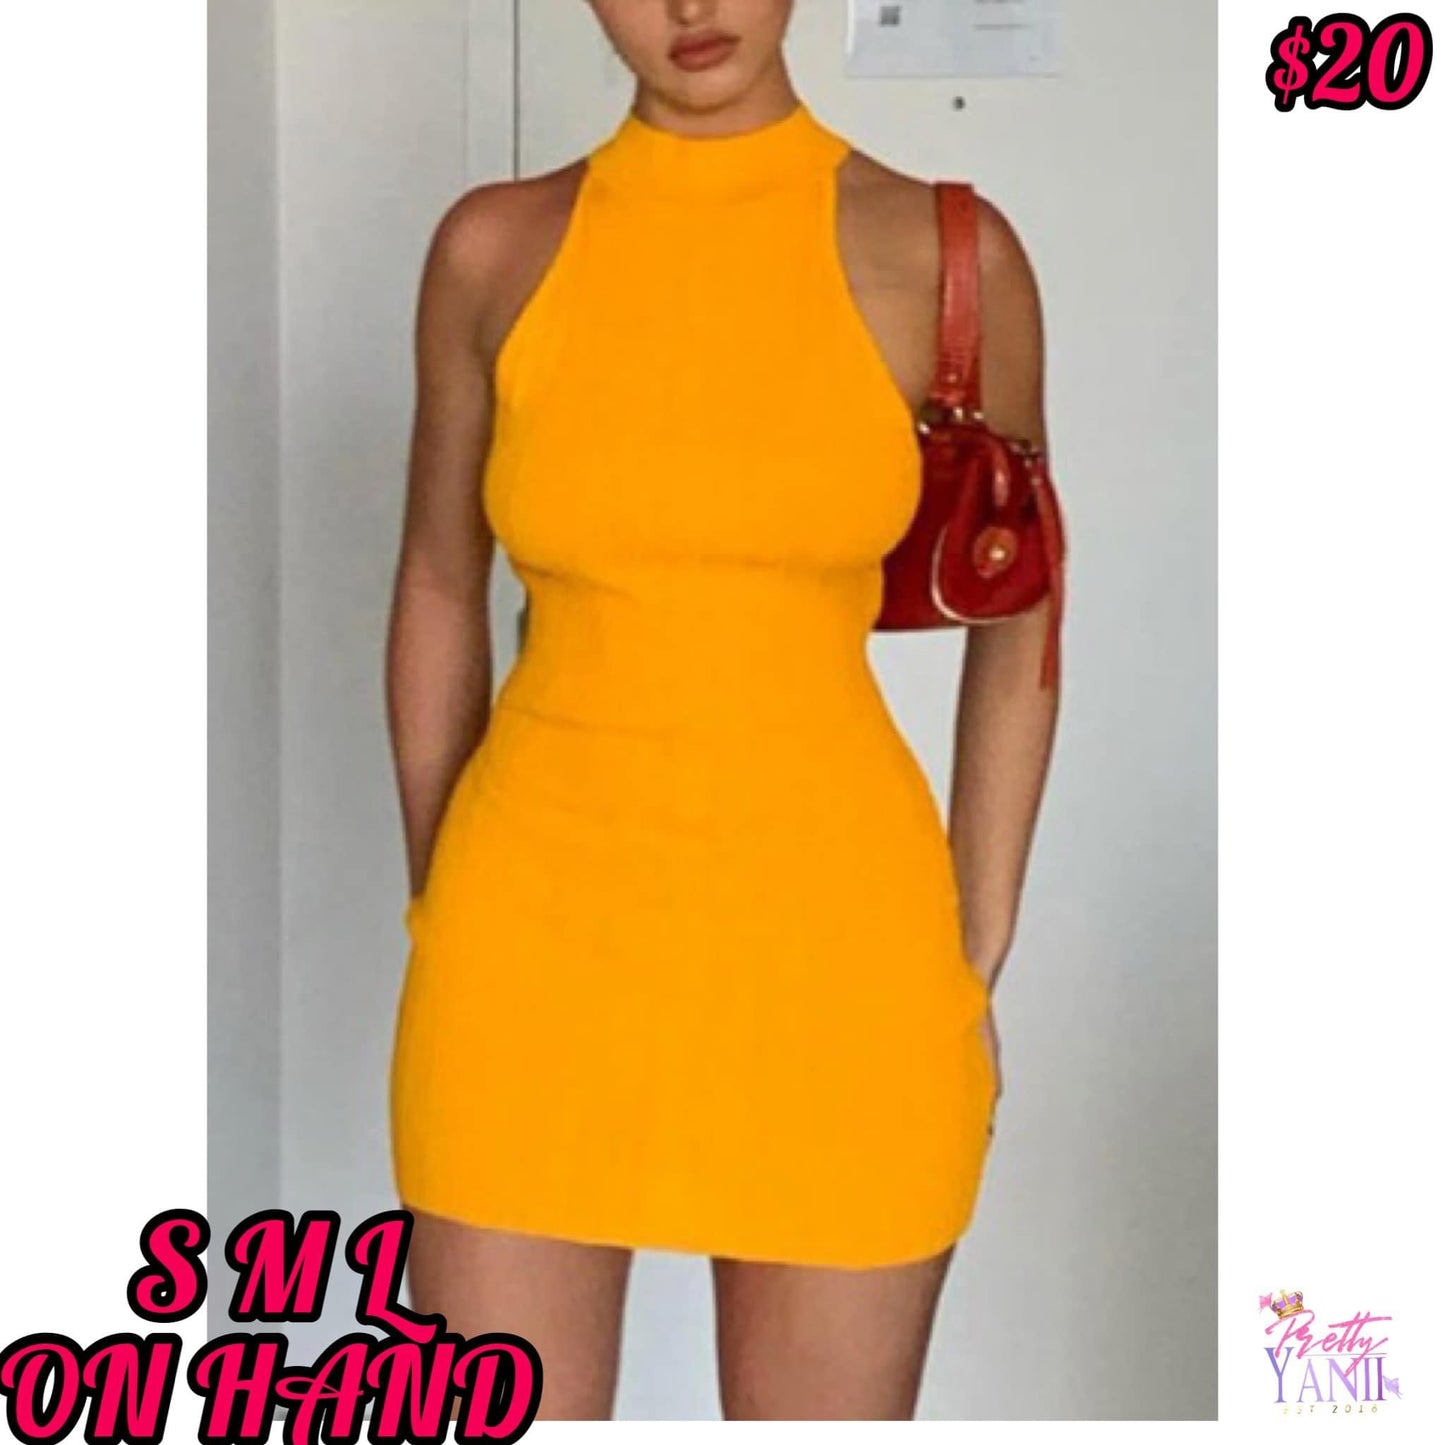 mustard-colored dress with a criss-cross back design and stretch fabric